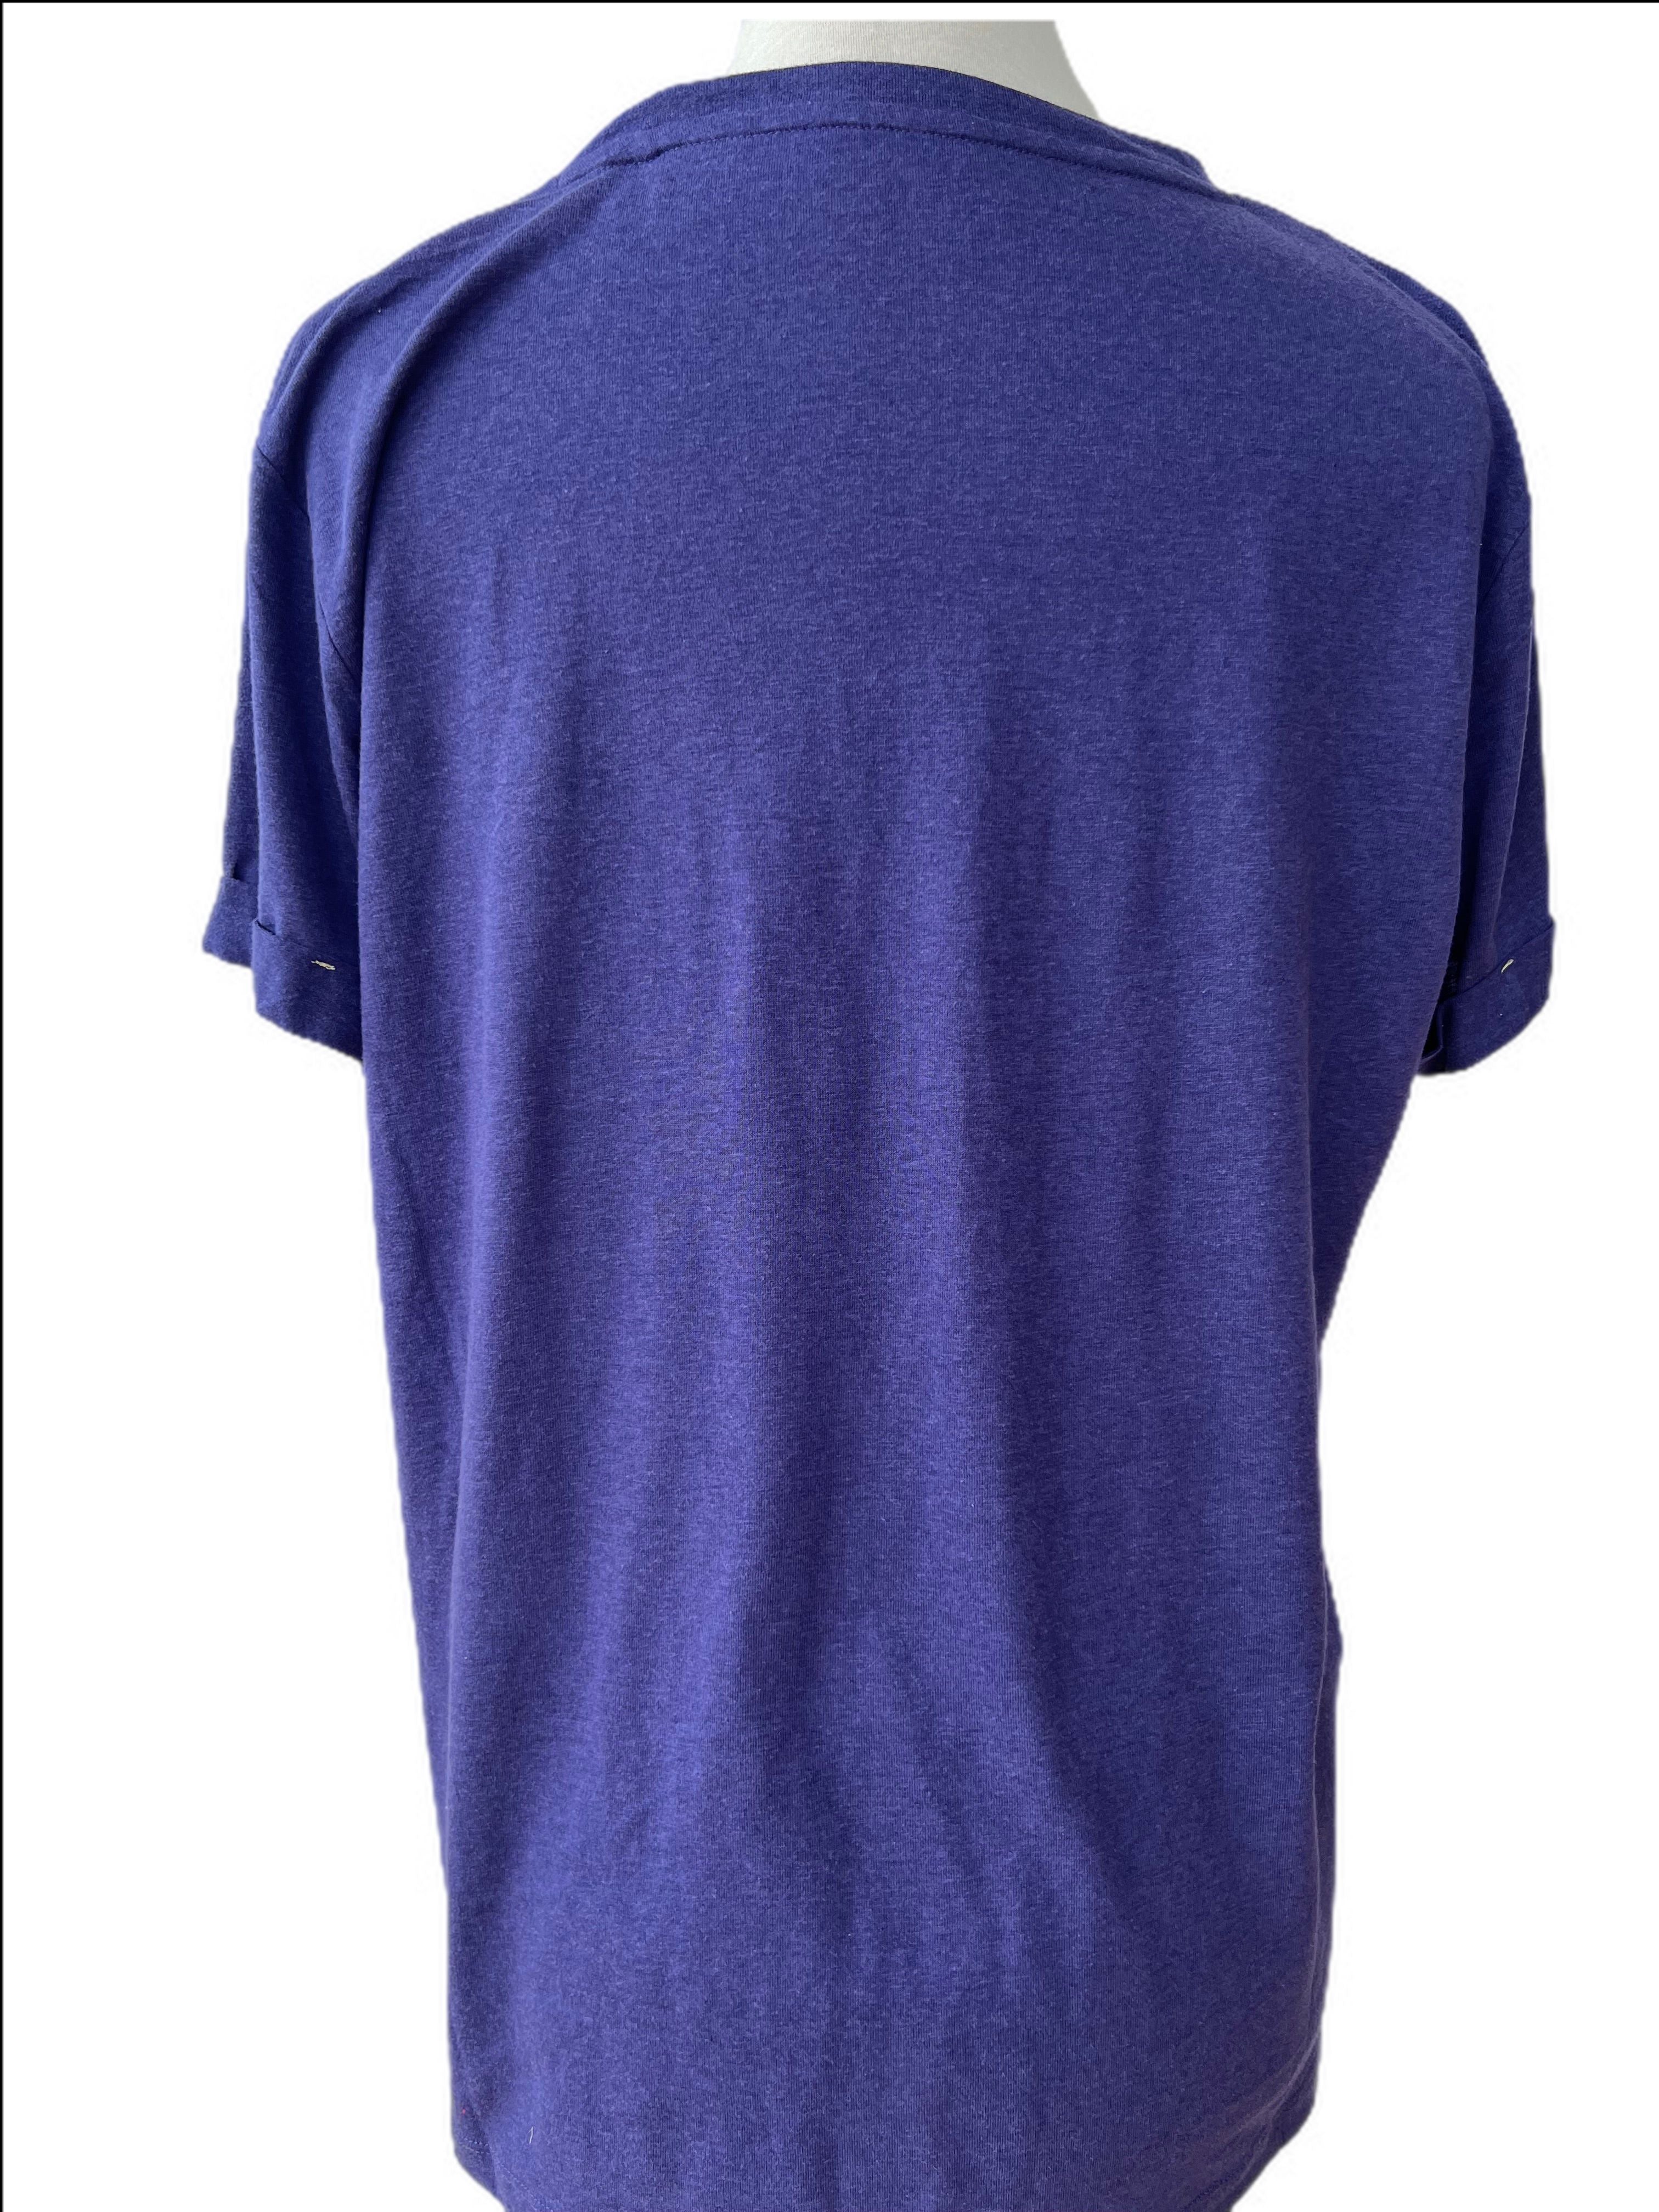 Short Sleeve V neck tee with vents